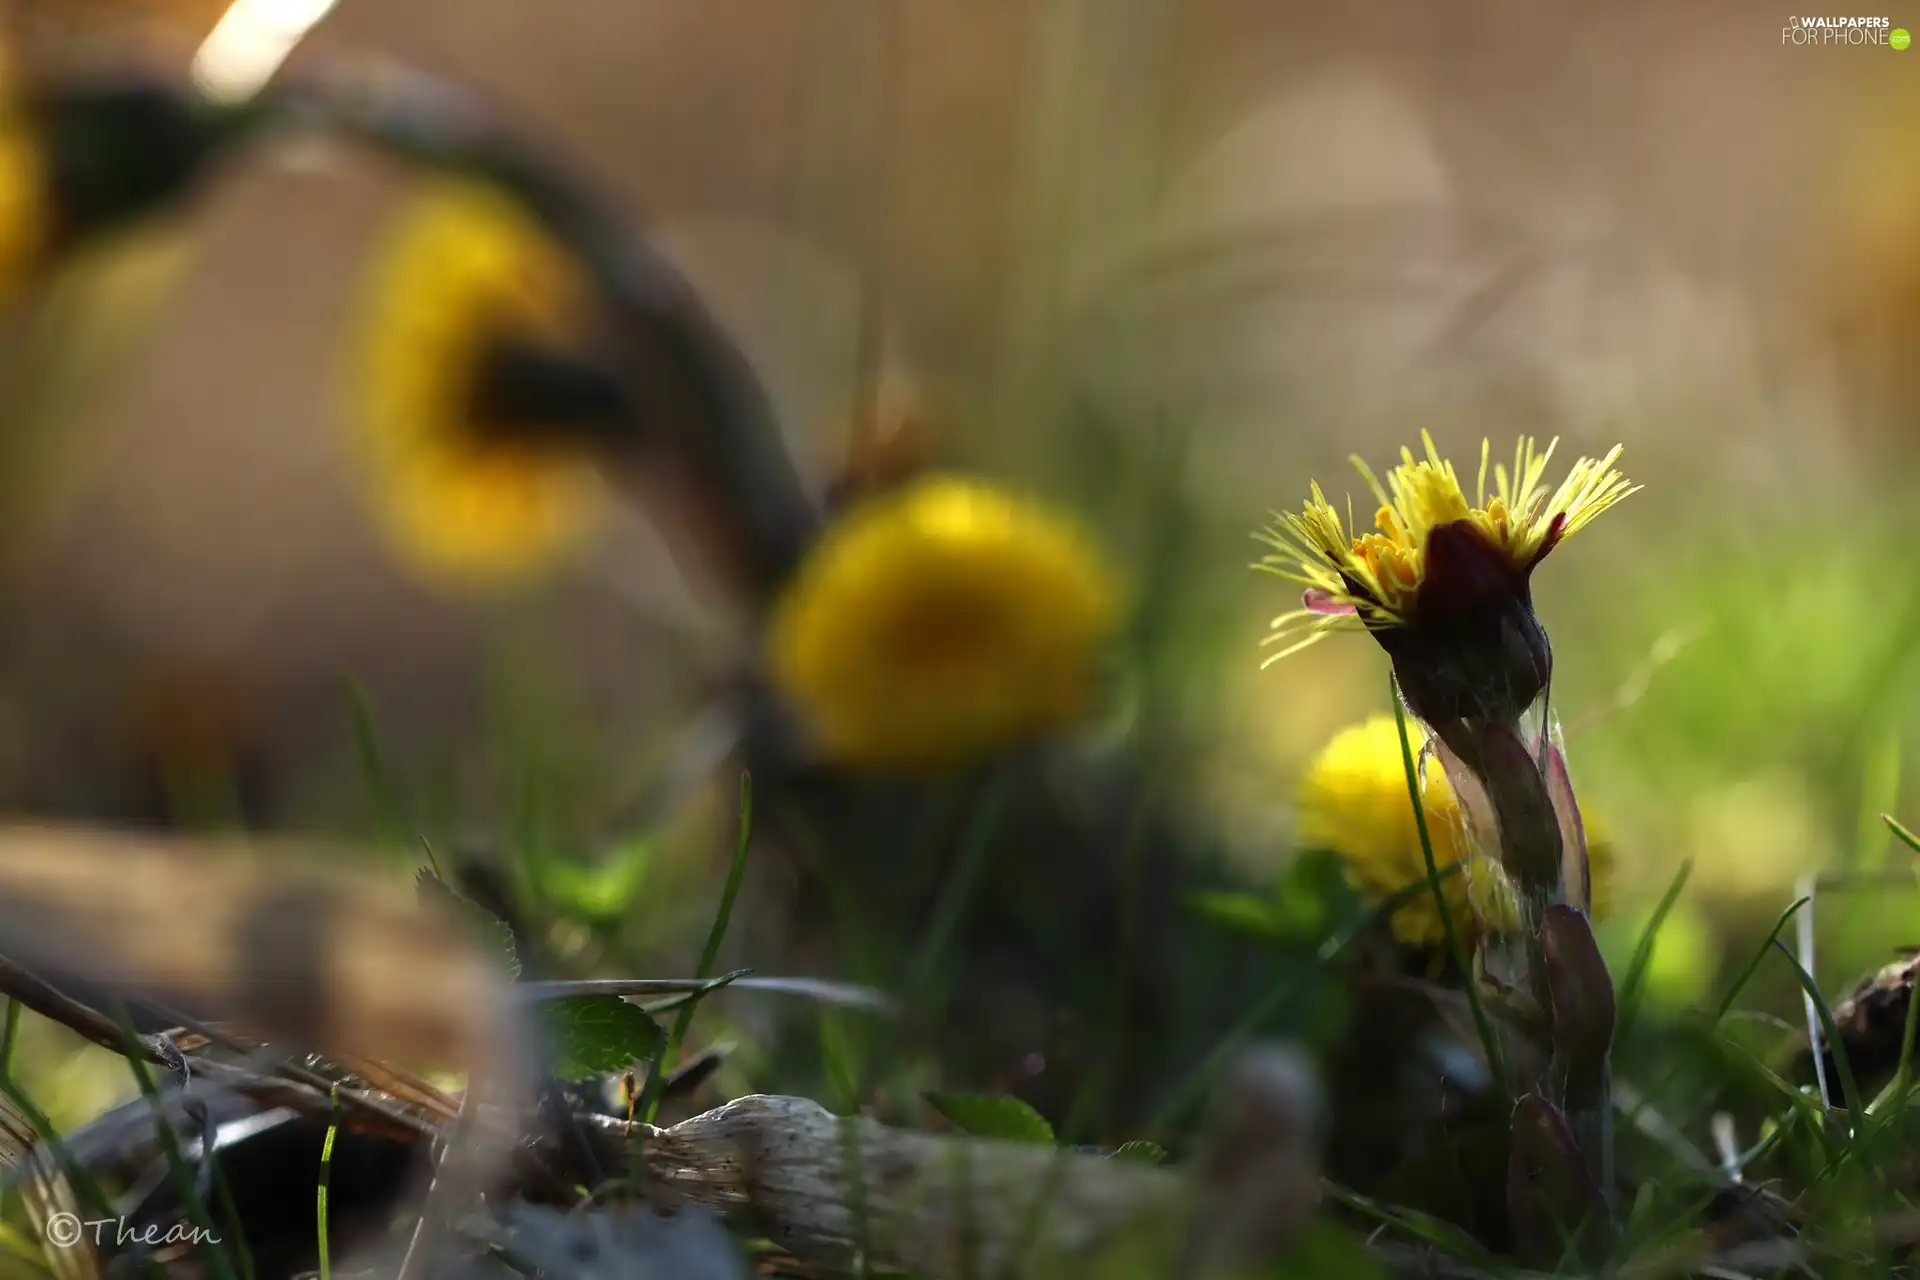 Common Coltsfoot, Flowers, Spring, Yellow